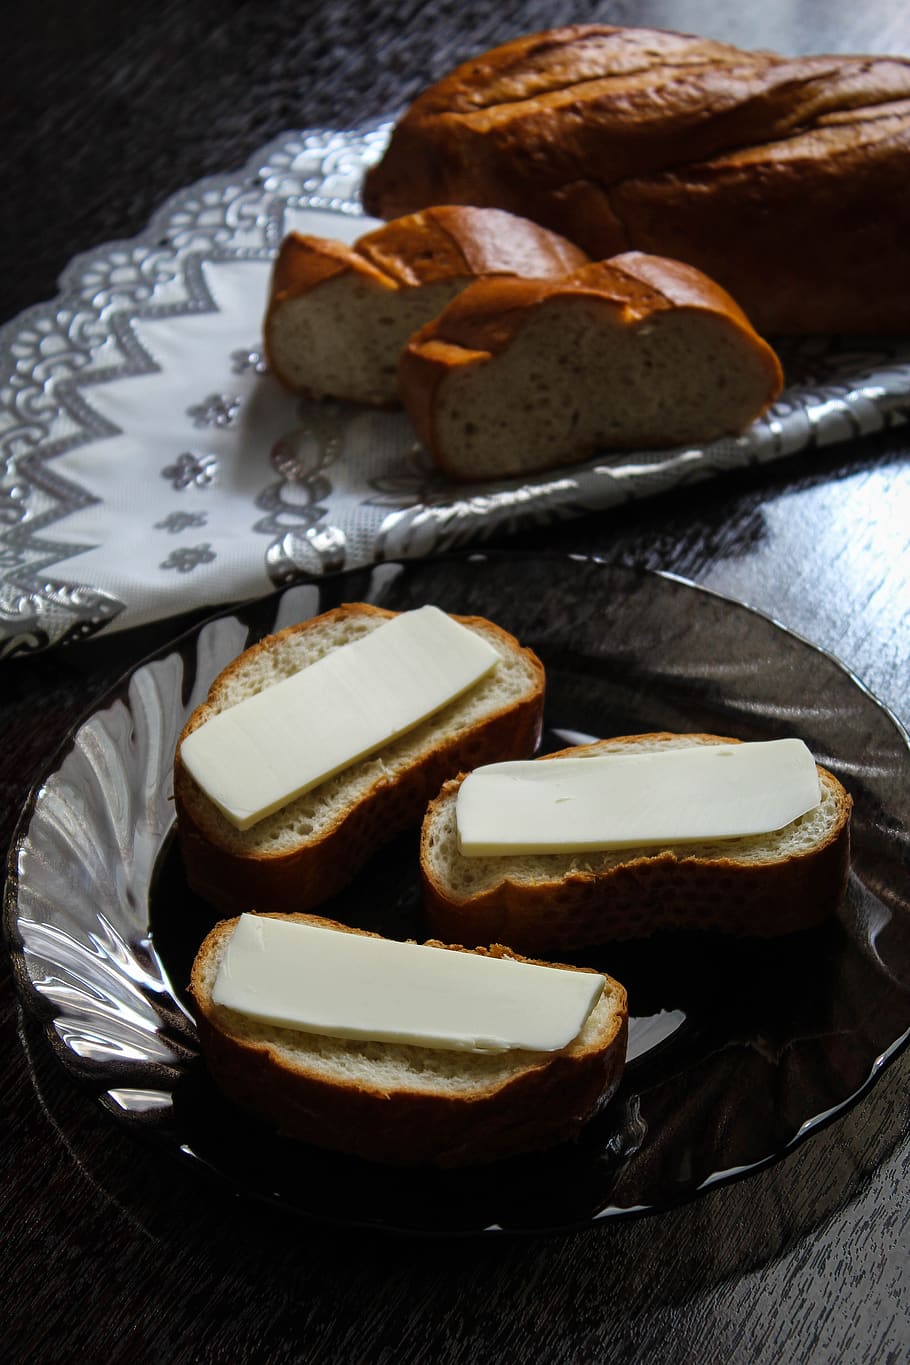 food, loaf, sliced, white, cheese, melted, table, wooden, dark, brown